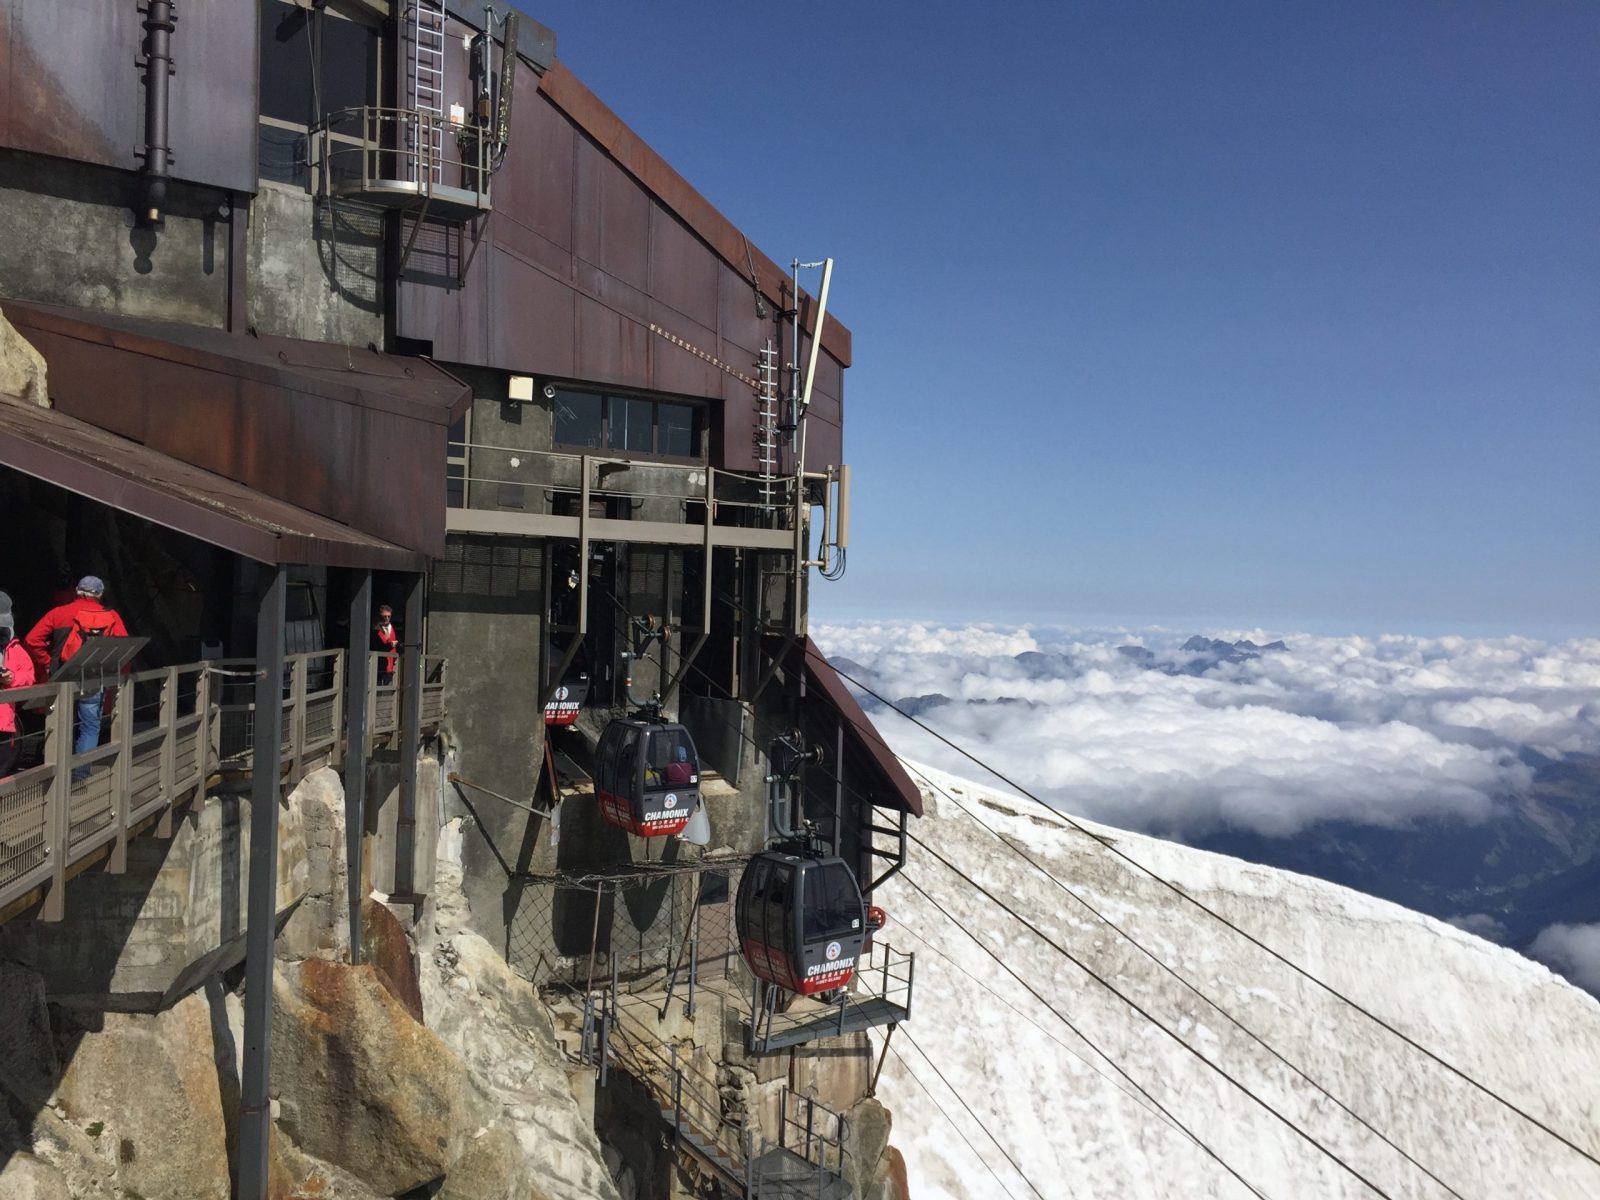 The departure of the Panoramic Mont Blanc Lift. We needed to go down and get going back to Troyes that night, but some day I'll get on it. Aiguille du Midi vs Punta Helbronner – which one you should do?